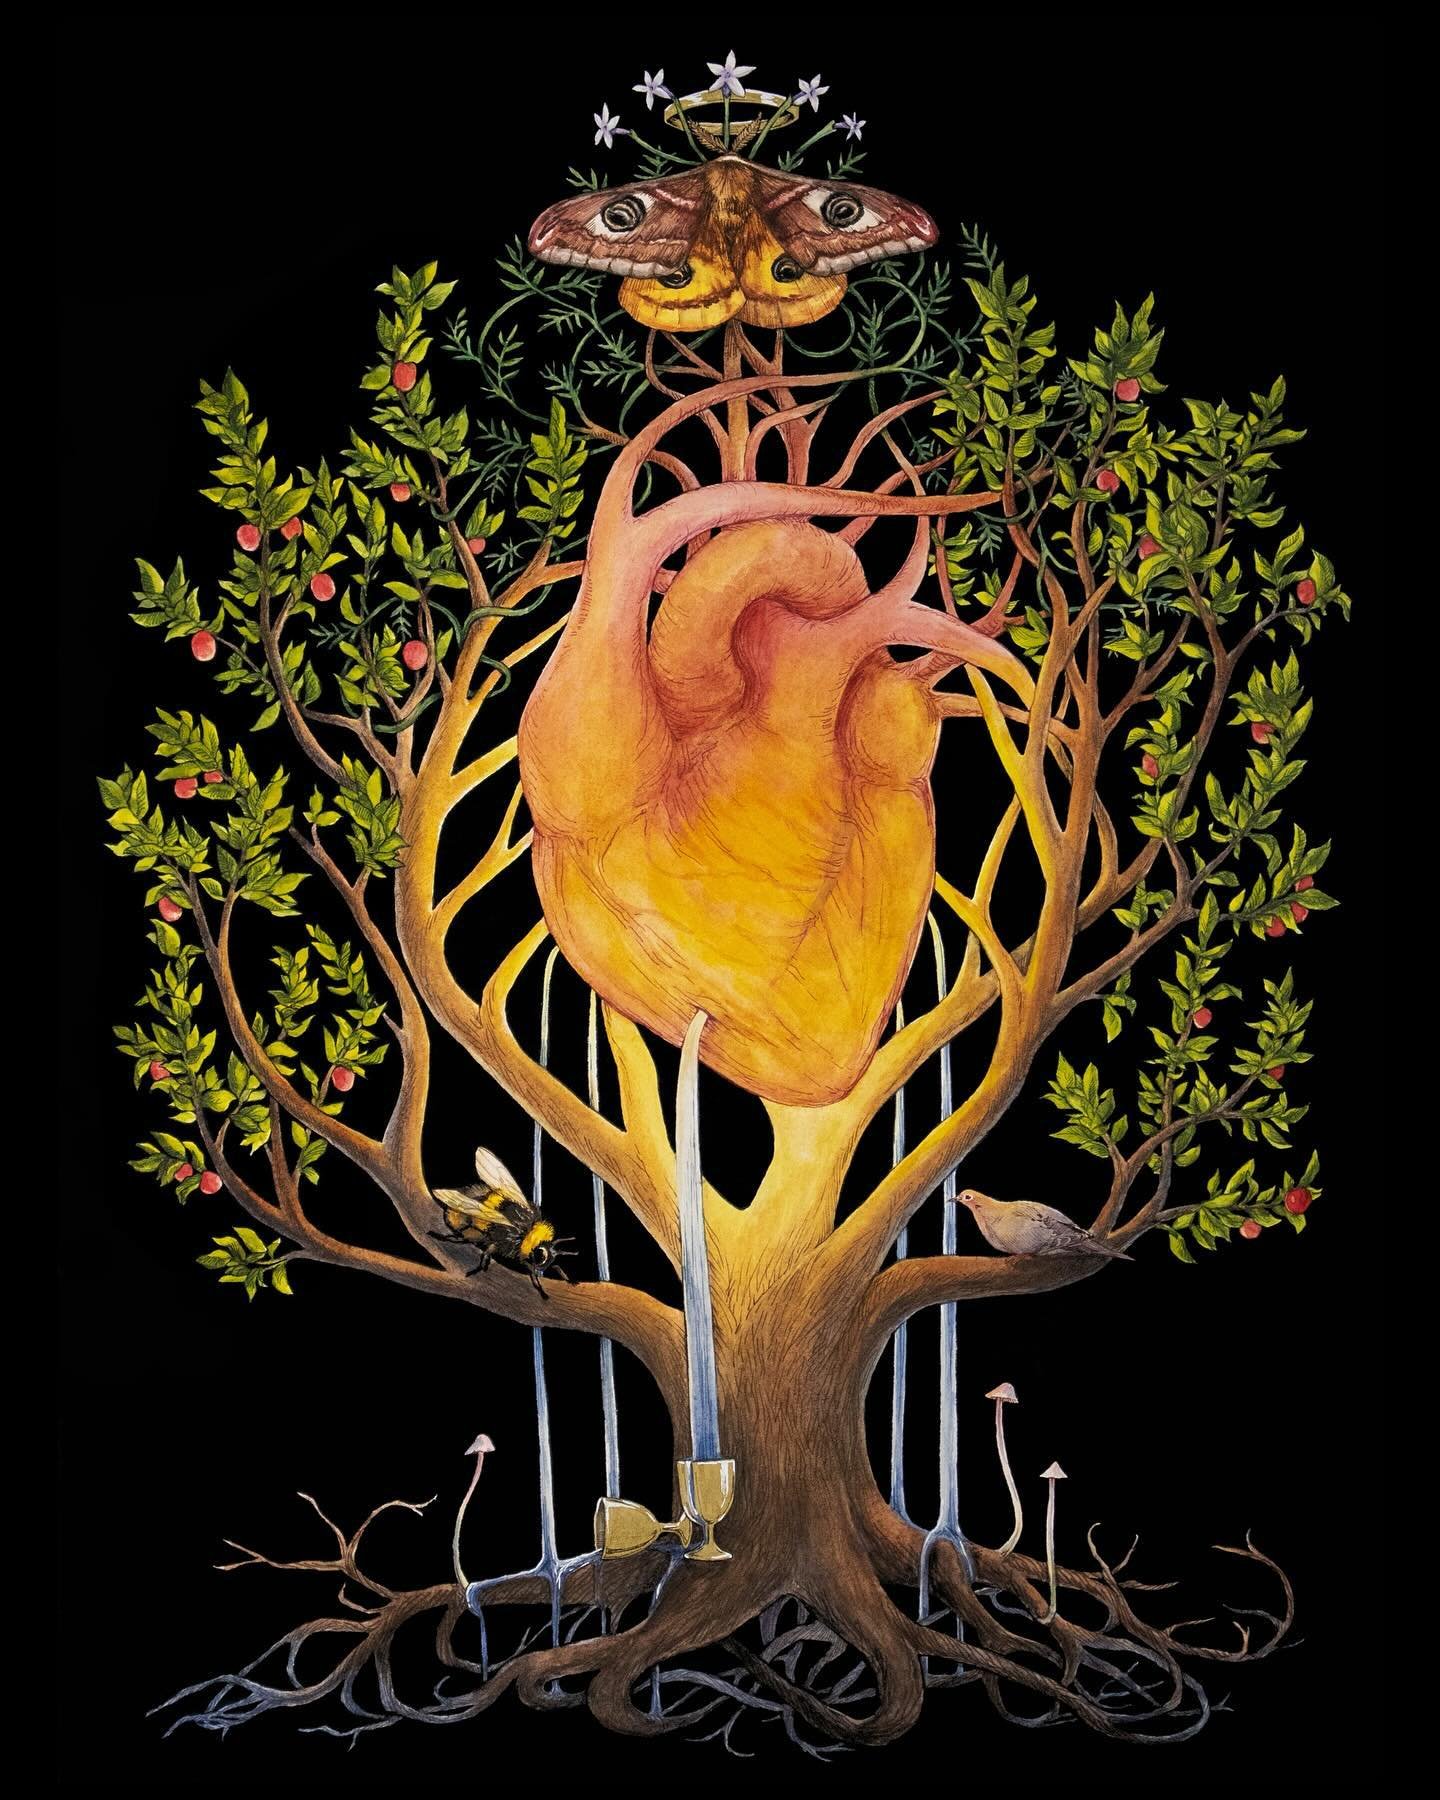 &ldquo;Heart Tree&rdquo; 
18&rdquo;x24&rdquo;
Watercolor on paper
2024
.
.
When I began the whole &ldquo;little plant guy&rdquo; series, my intention was always to depict transformation and to leave it open-ended as to whether the plant was turning i